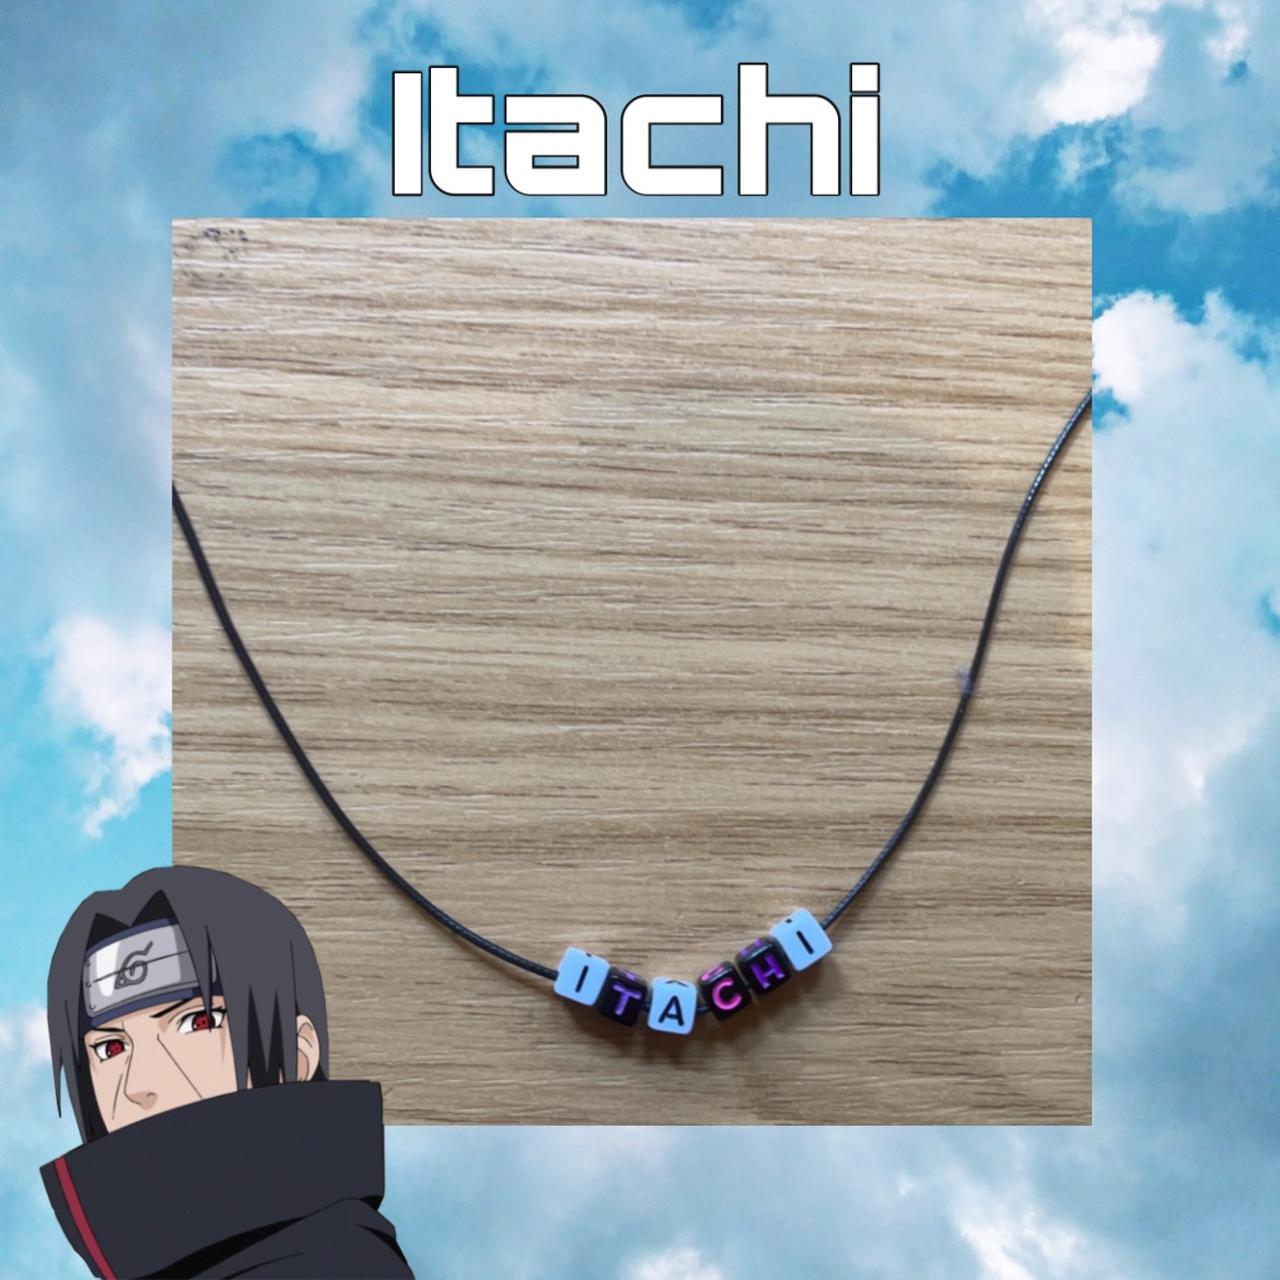 Yamato One - Itachi set Rs1850 Available at Yamato One Anime Store. 5th  floor Jana Jaya City, Rajagiriya 🛒Online store www.yamatoone.com • Cash on  delivery 💵. • Card payment💳. • Delivery to